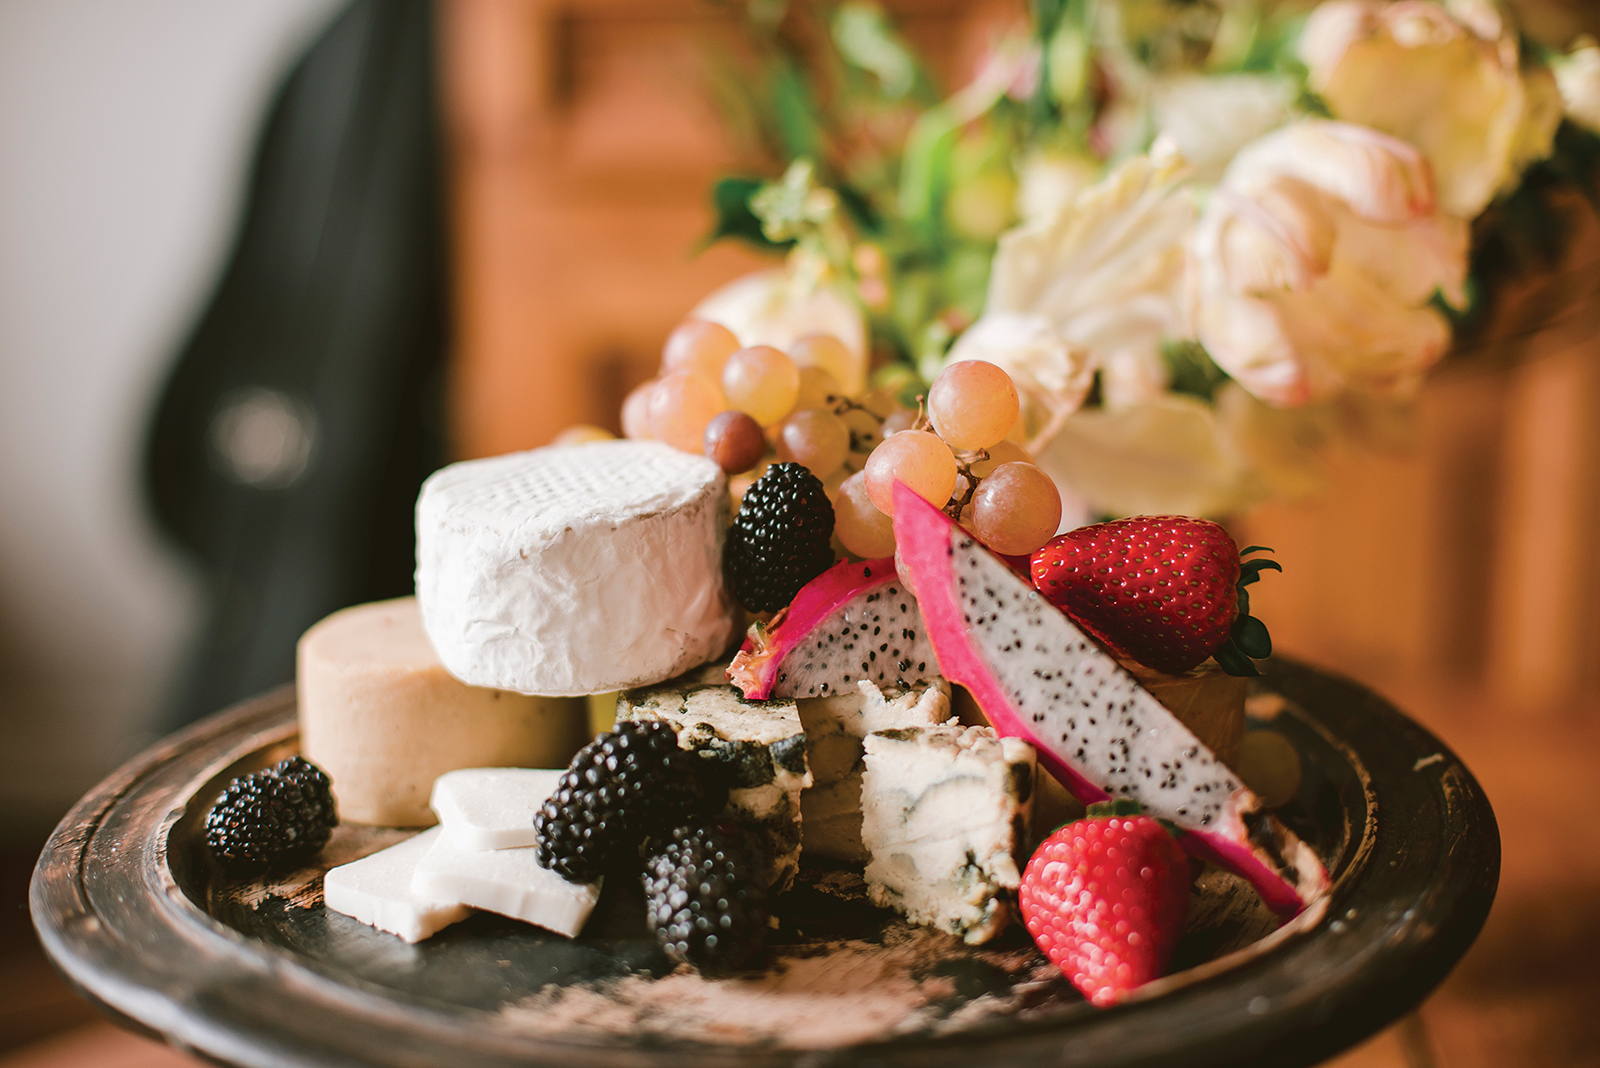 The Frauxmagerie in Meaford produces a variety of non-dairy cheeses, including Botanic Camembert, Mauxarella and Botanic True Blue.